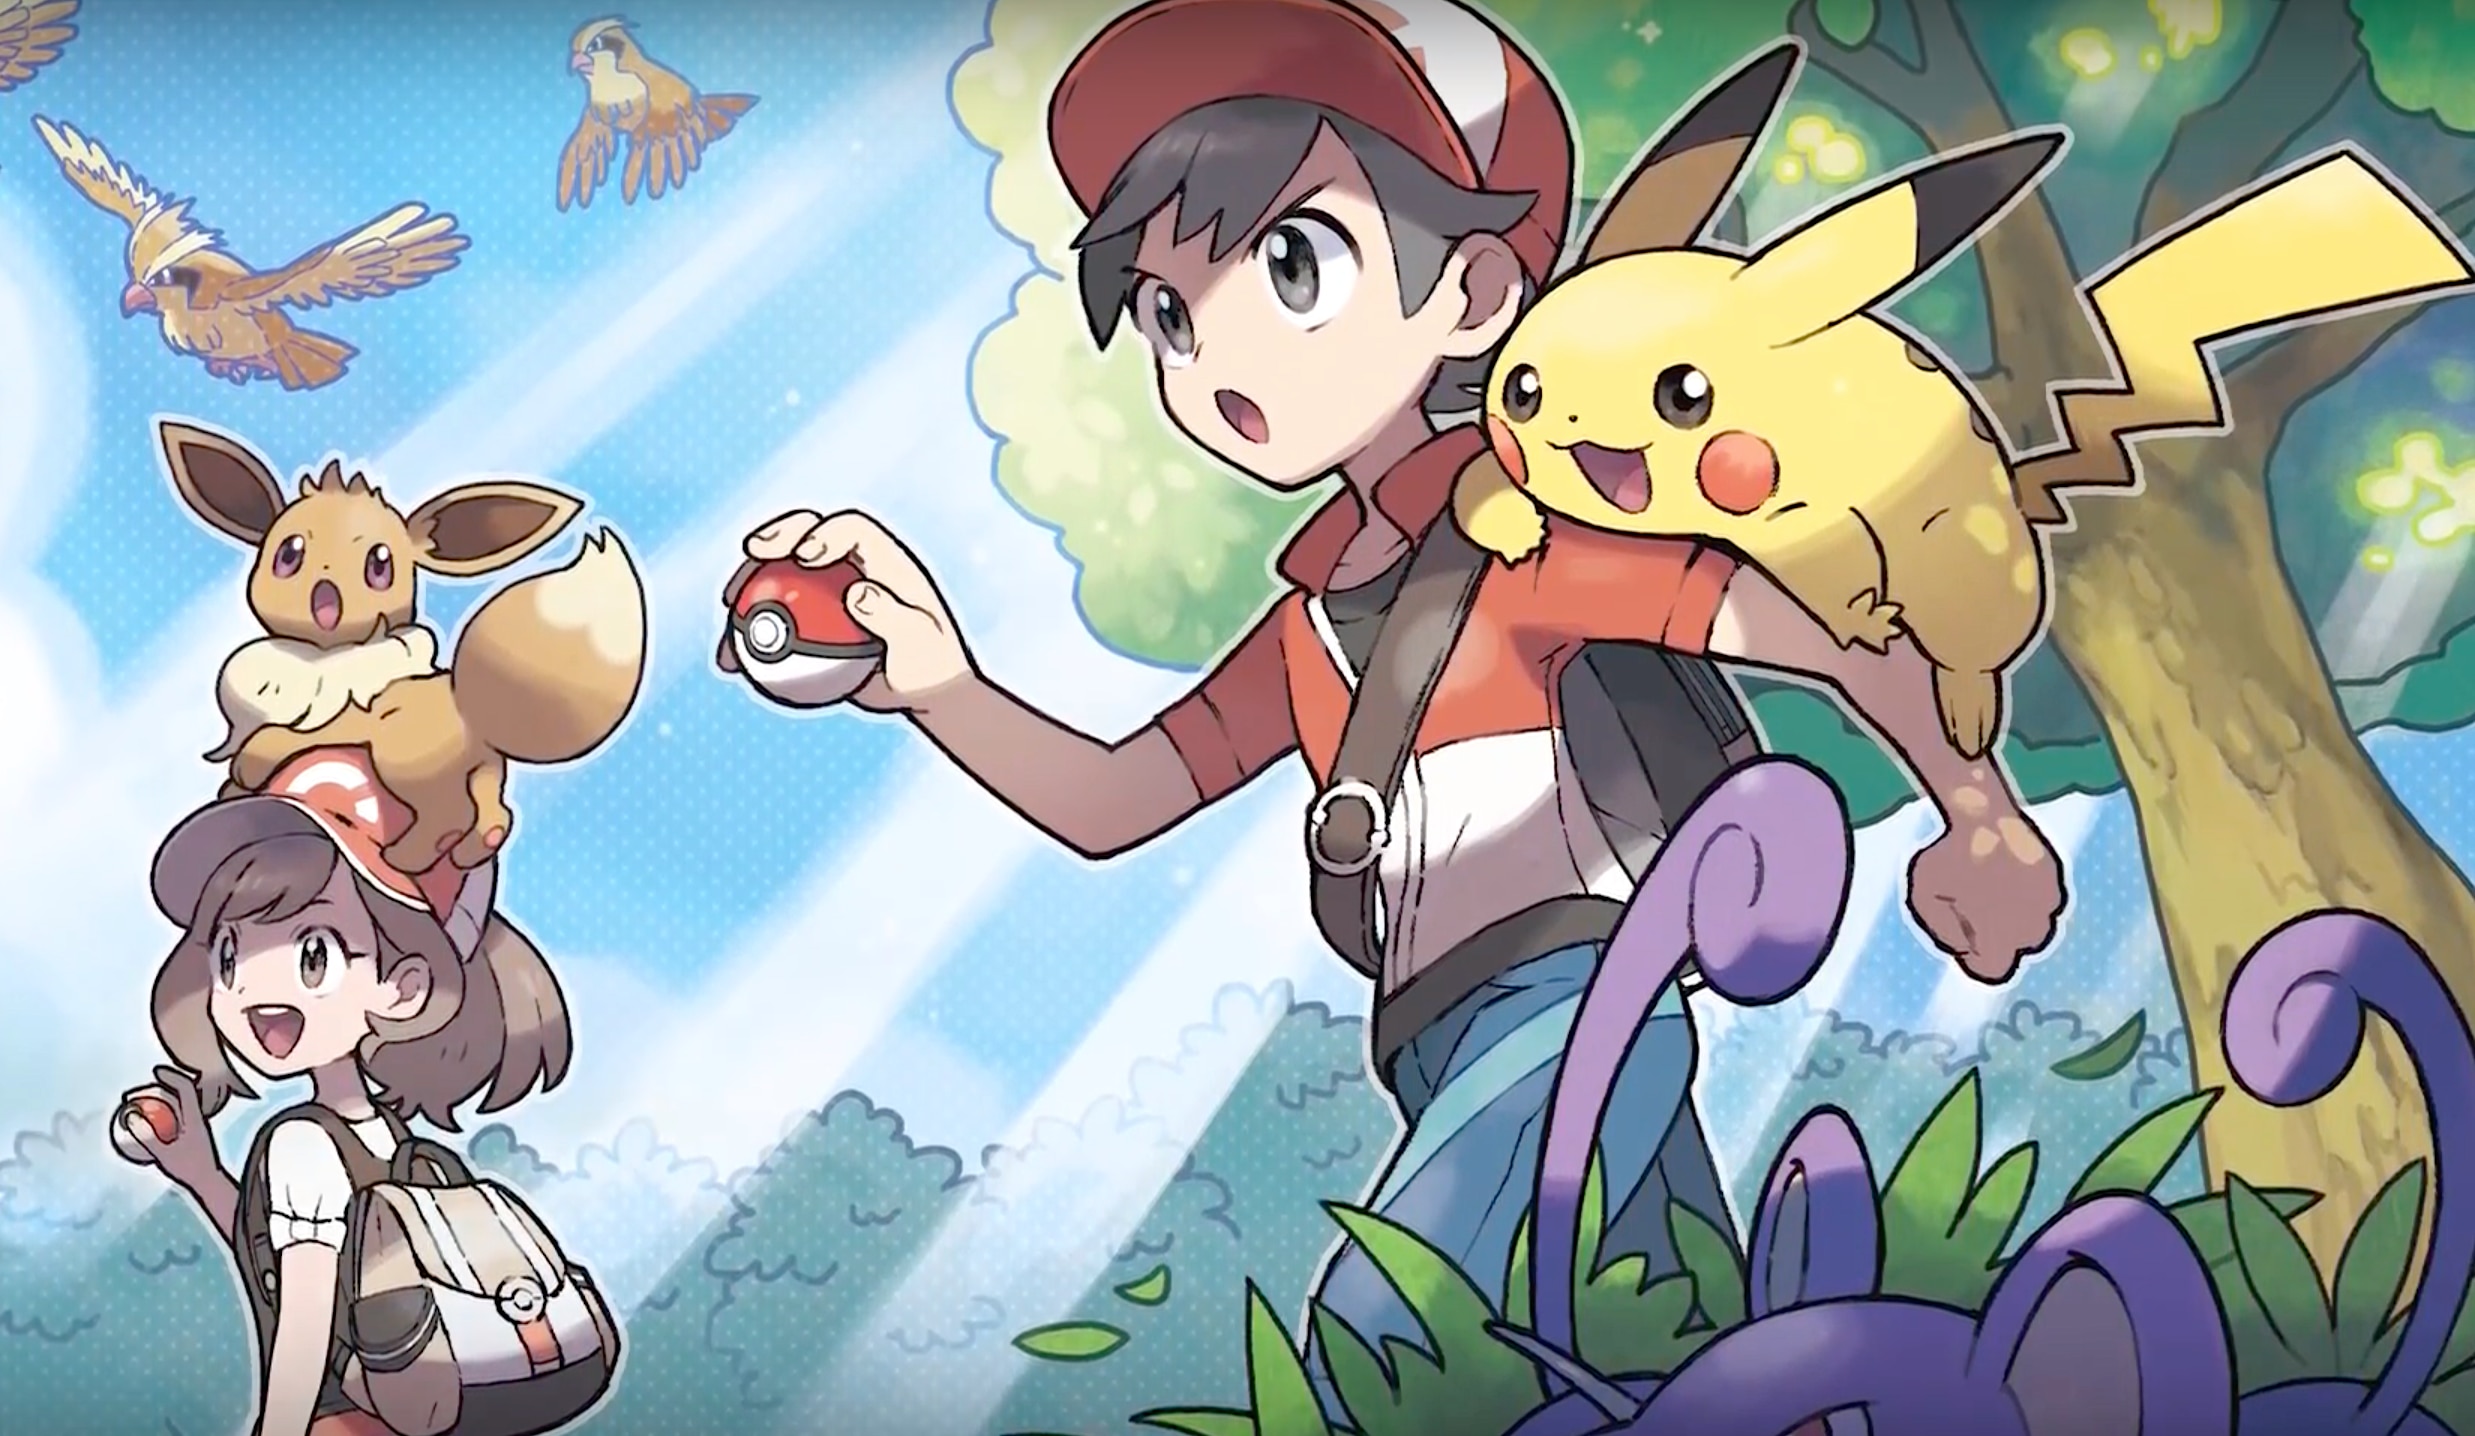 Ash and Pikachu in Pokemon Super Music Collection video